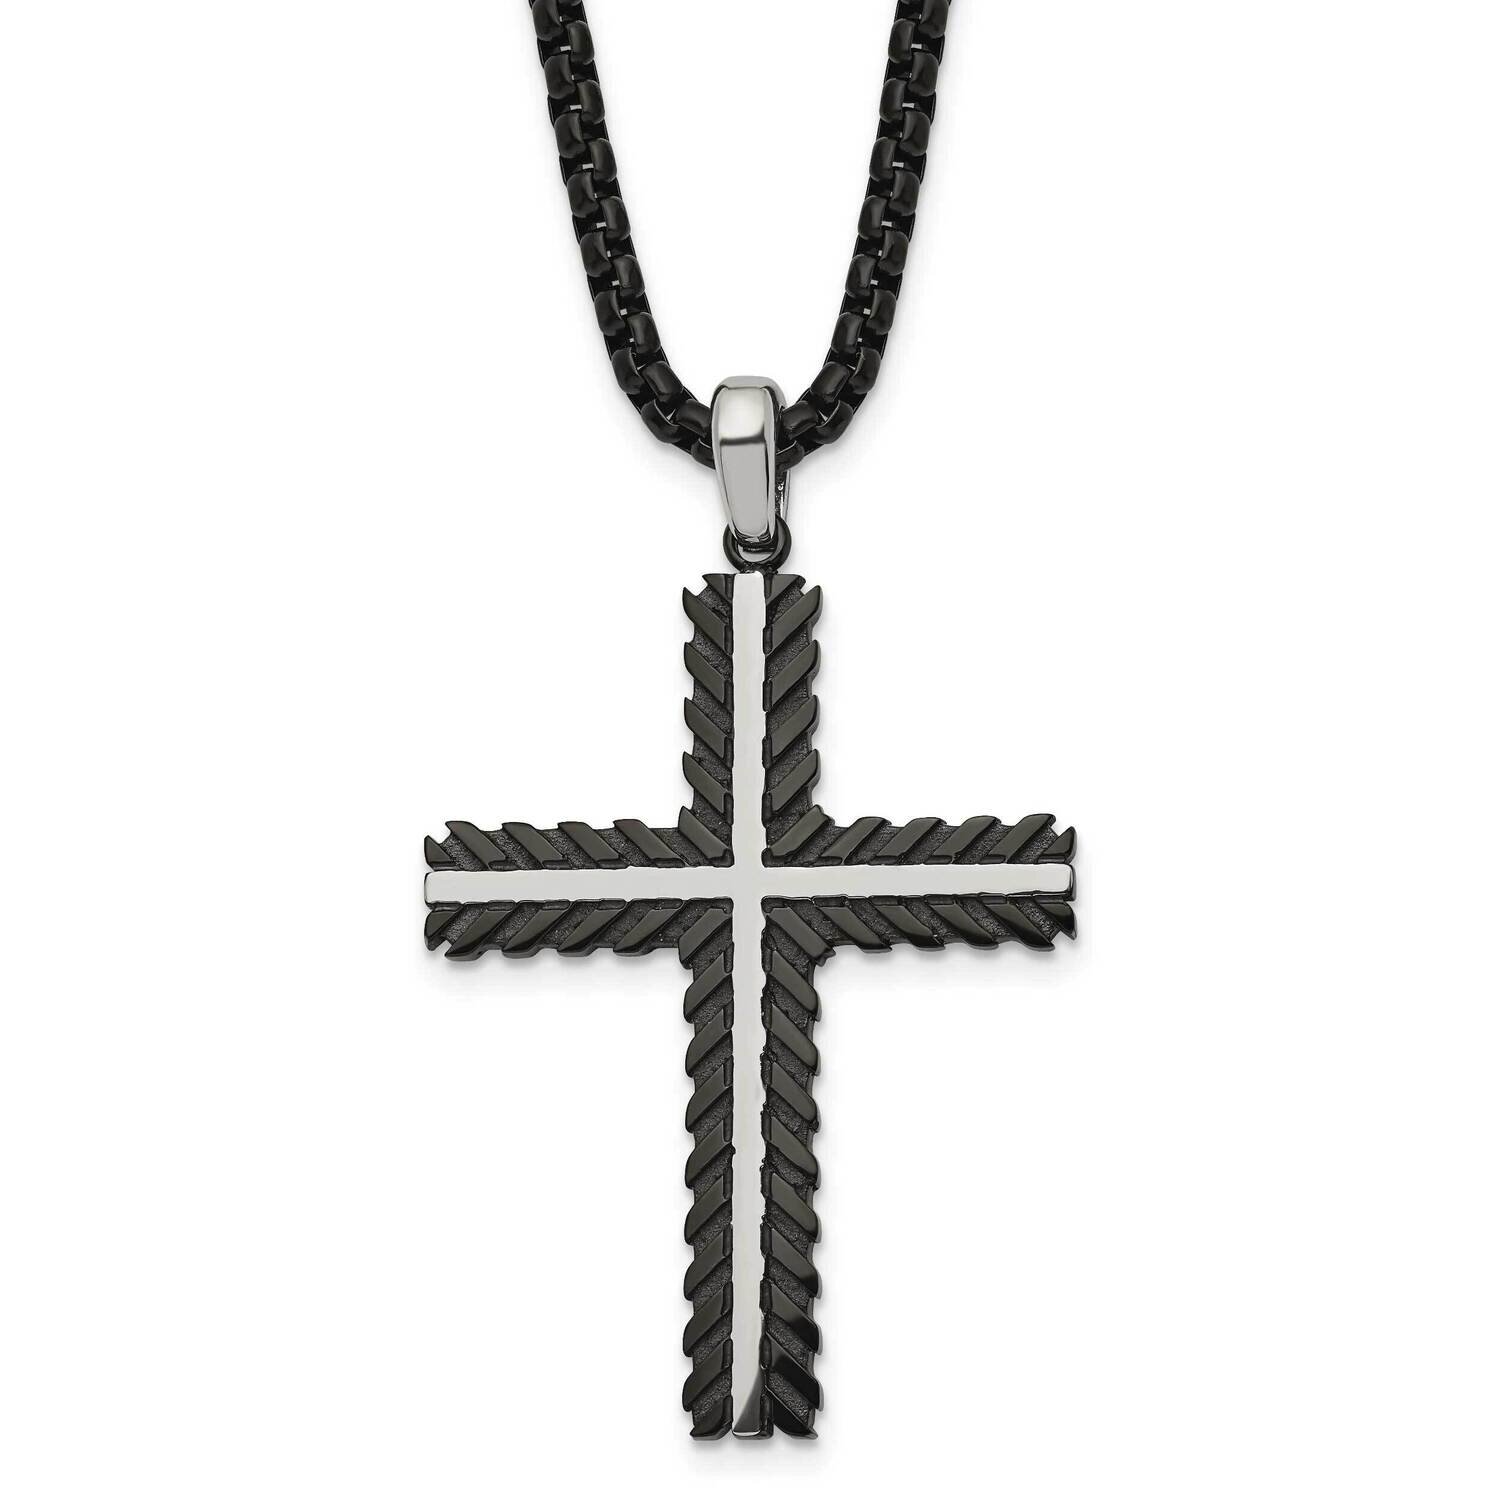 Polished Black Ip-Plated Cross 24 Inch Necklace Stainless Steel Brushed SRN2966-24